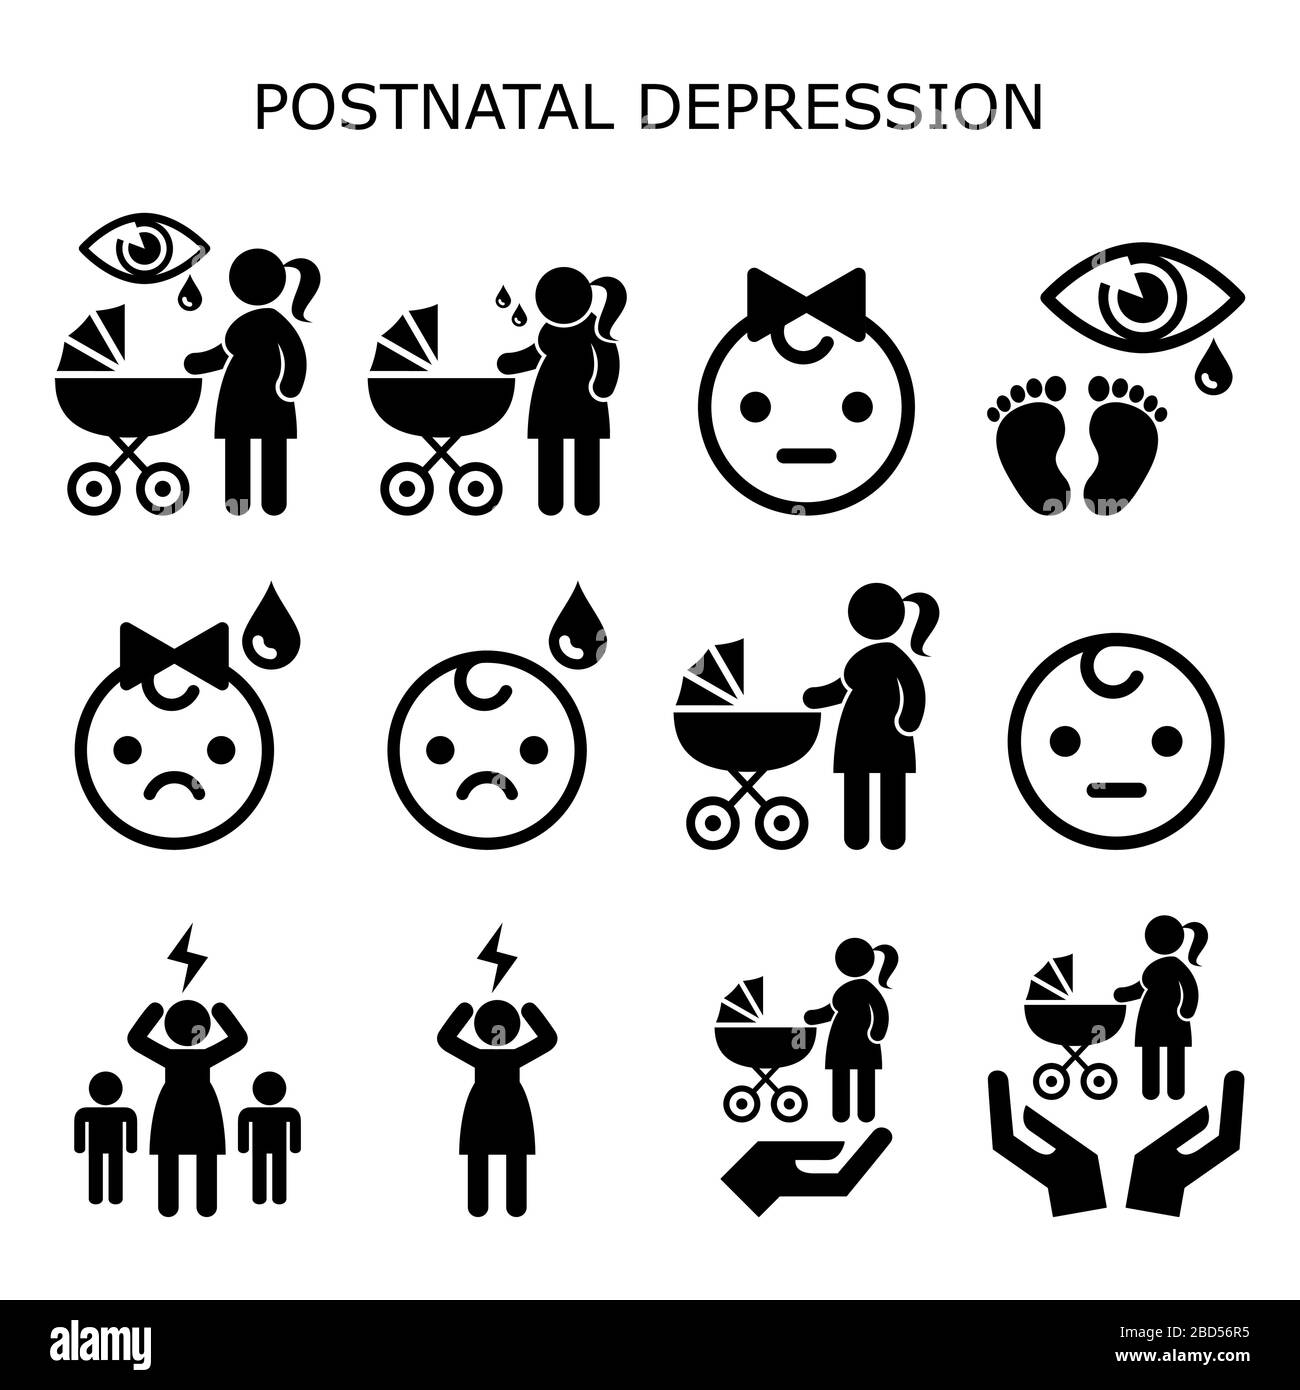 Postnatal depression, postpartum depression vector icon set - new mothers mental health concept, women with newborn baby experiencing baby blues Stock Vector